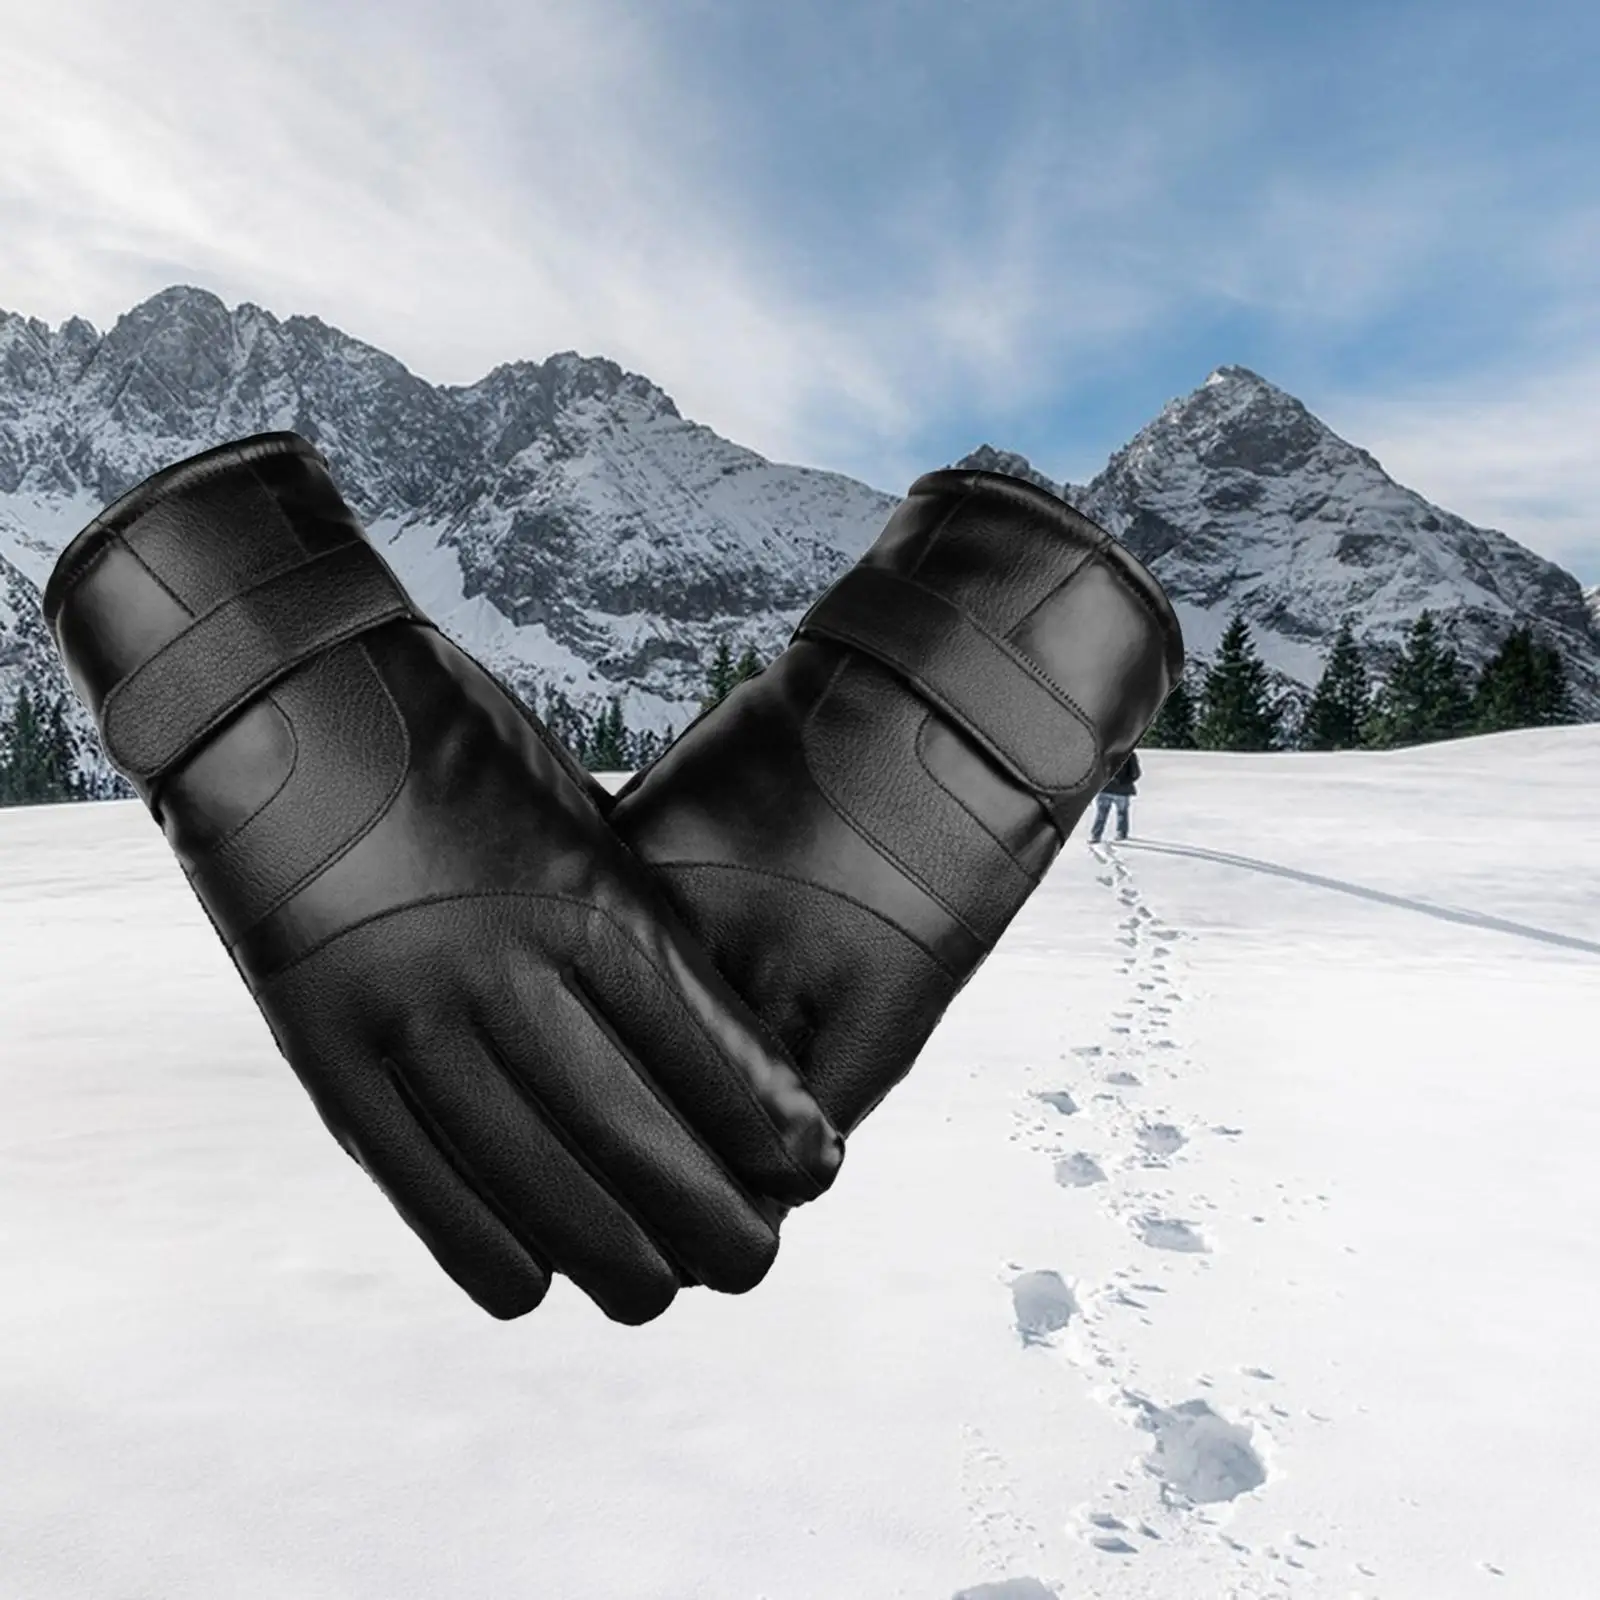 Unisex Thermal Gloves Touch Screen PU Outdoor Autumn Windproof Thicken Mittens for Running Biking Skating Climbing Cold Weather